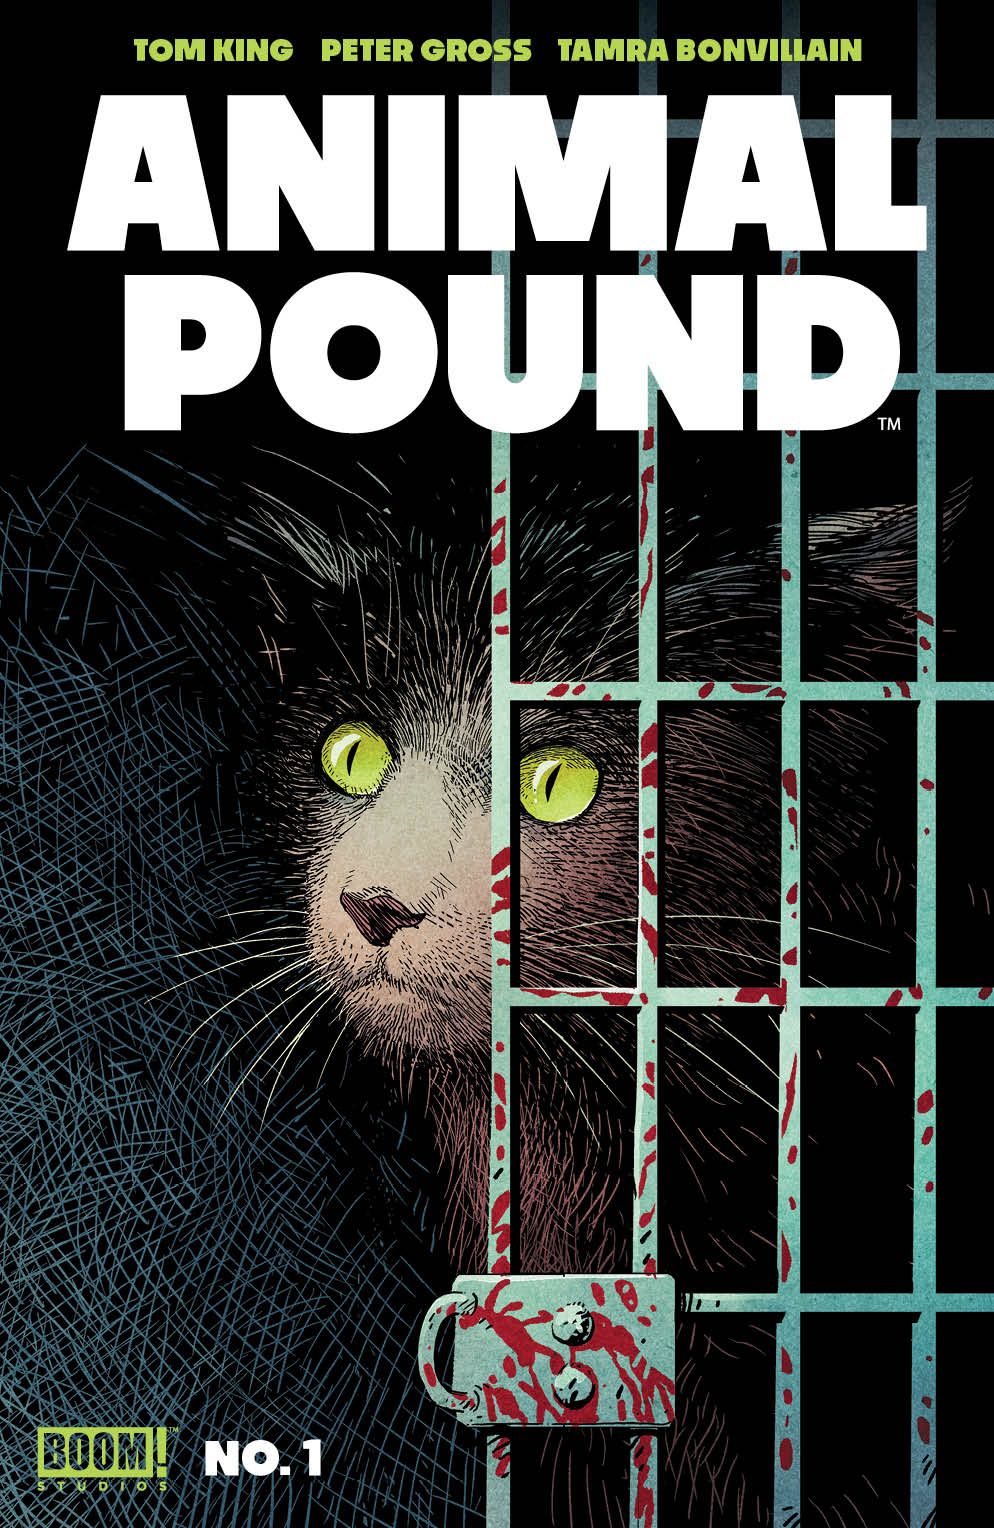 Animal Pound #1 ACover by Peter Gross and Tamra Bonvillain.